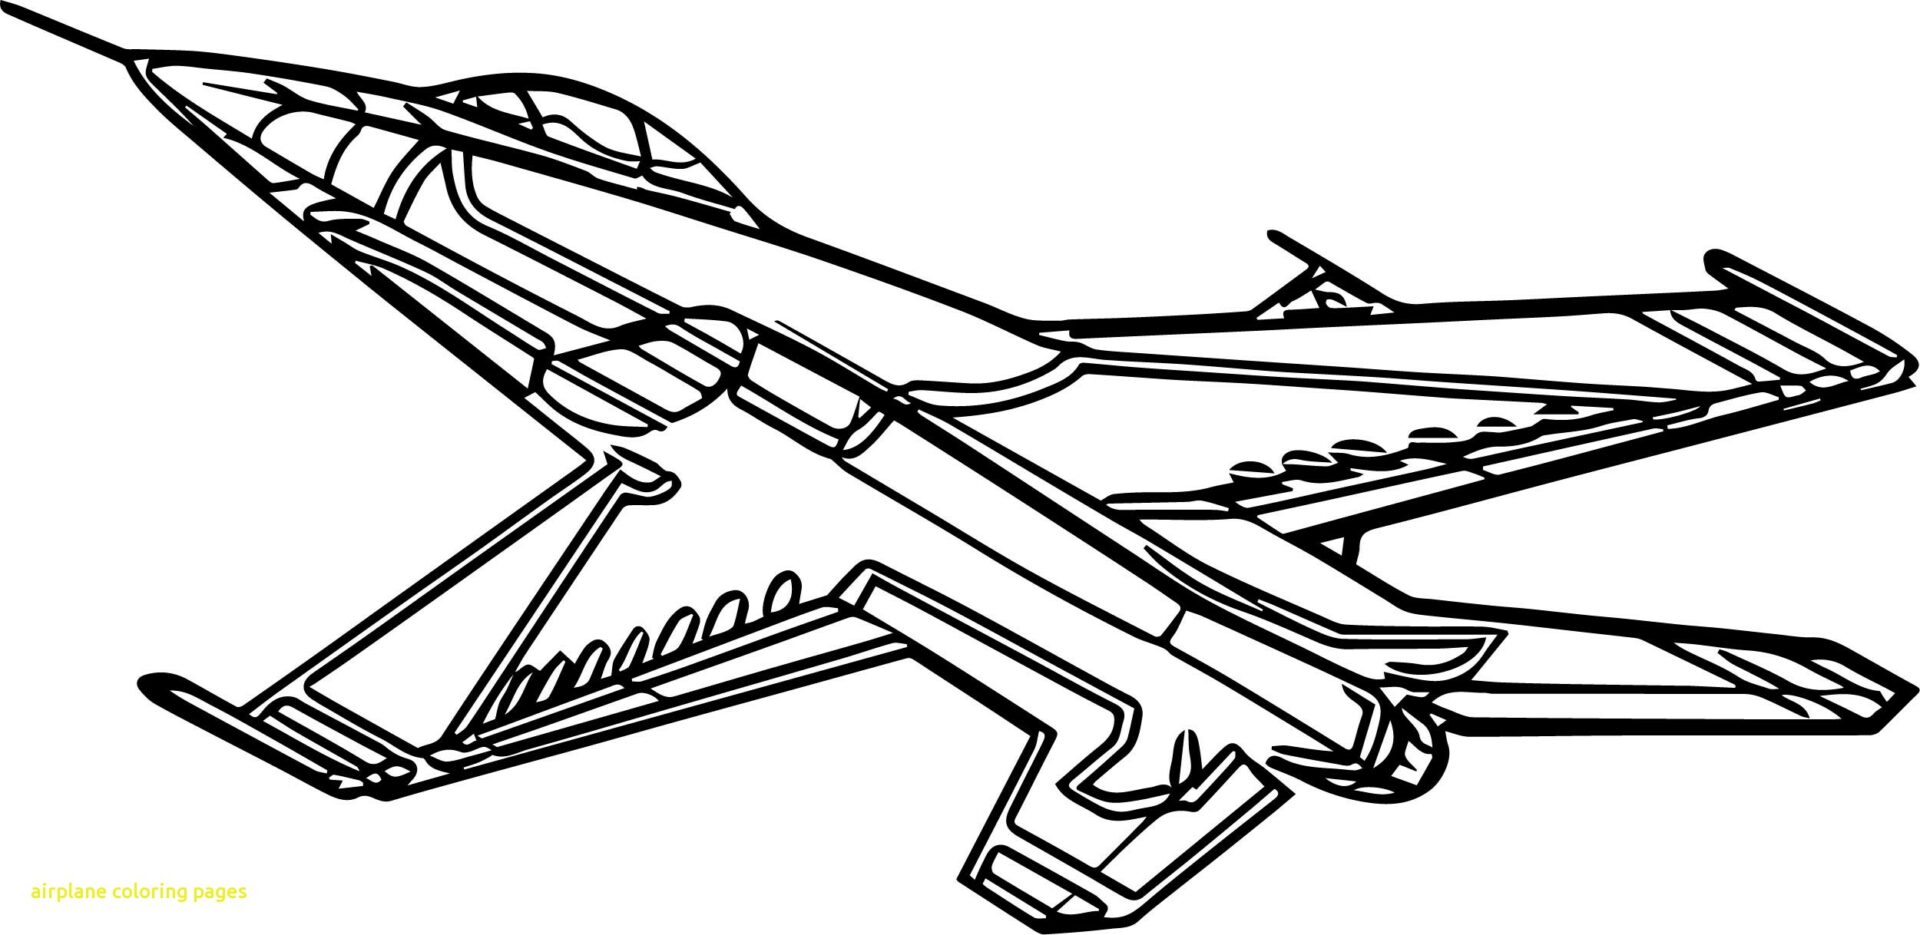 Air Force 1 Plane Coloring Page - Free Printable Coloring Pages For Kids